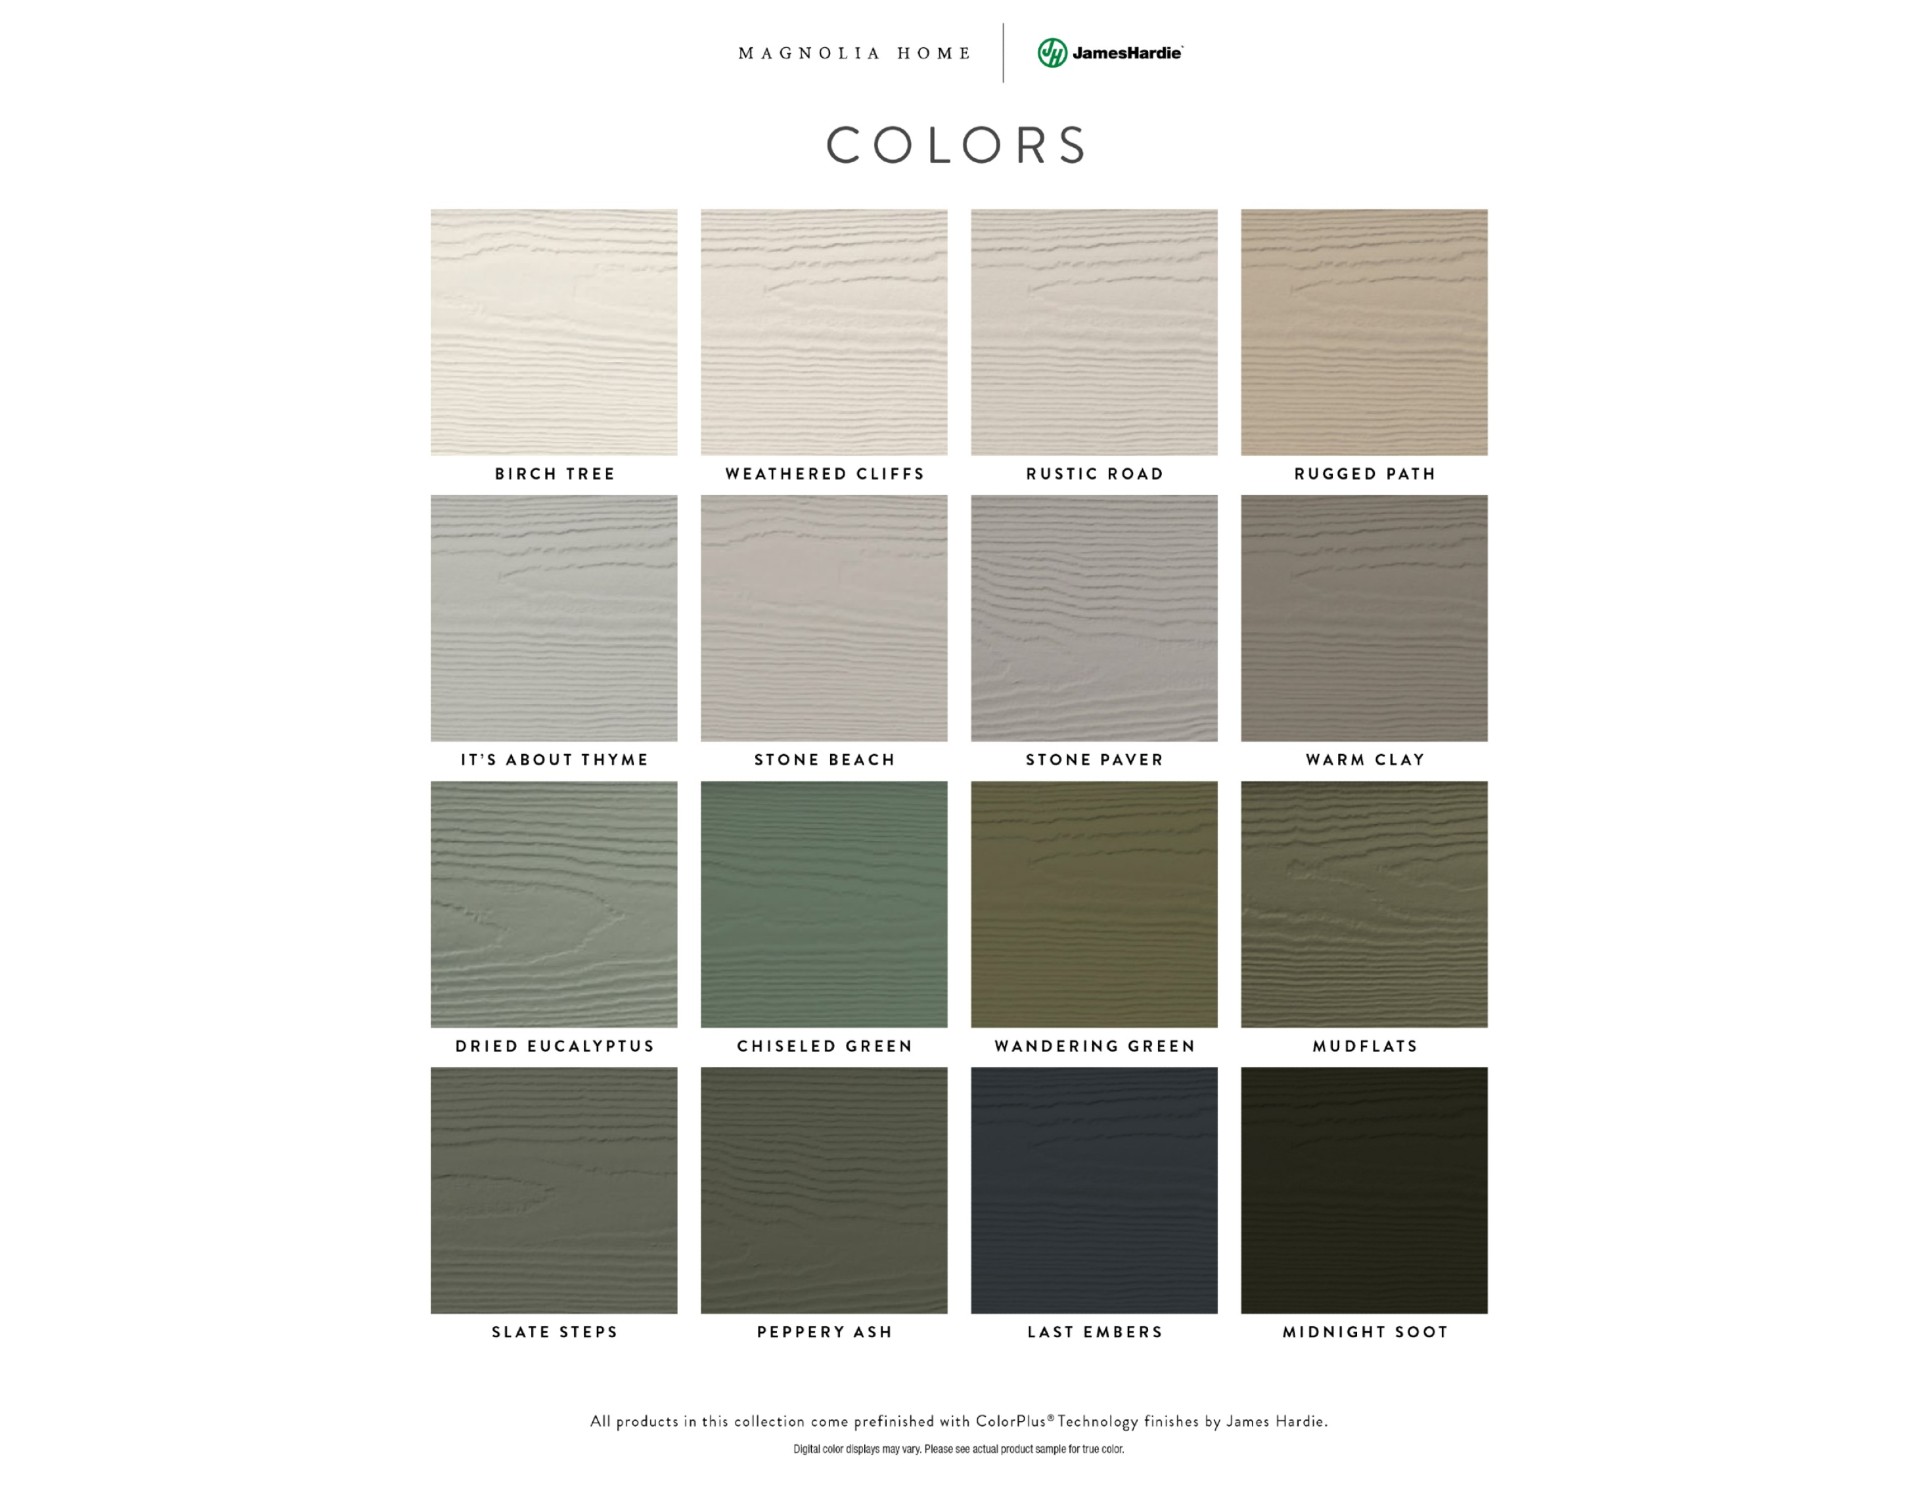 The Collection’s sixteen ColorPlus® Technology finishes feature a variety of natural, earthy tones, including greens, beiges, and greys.